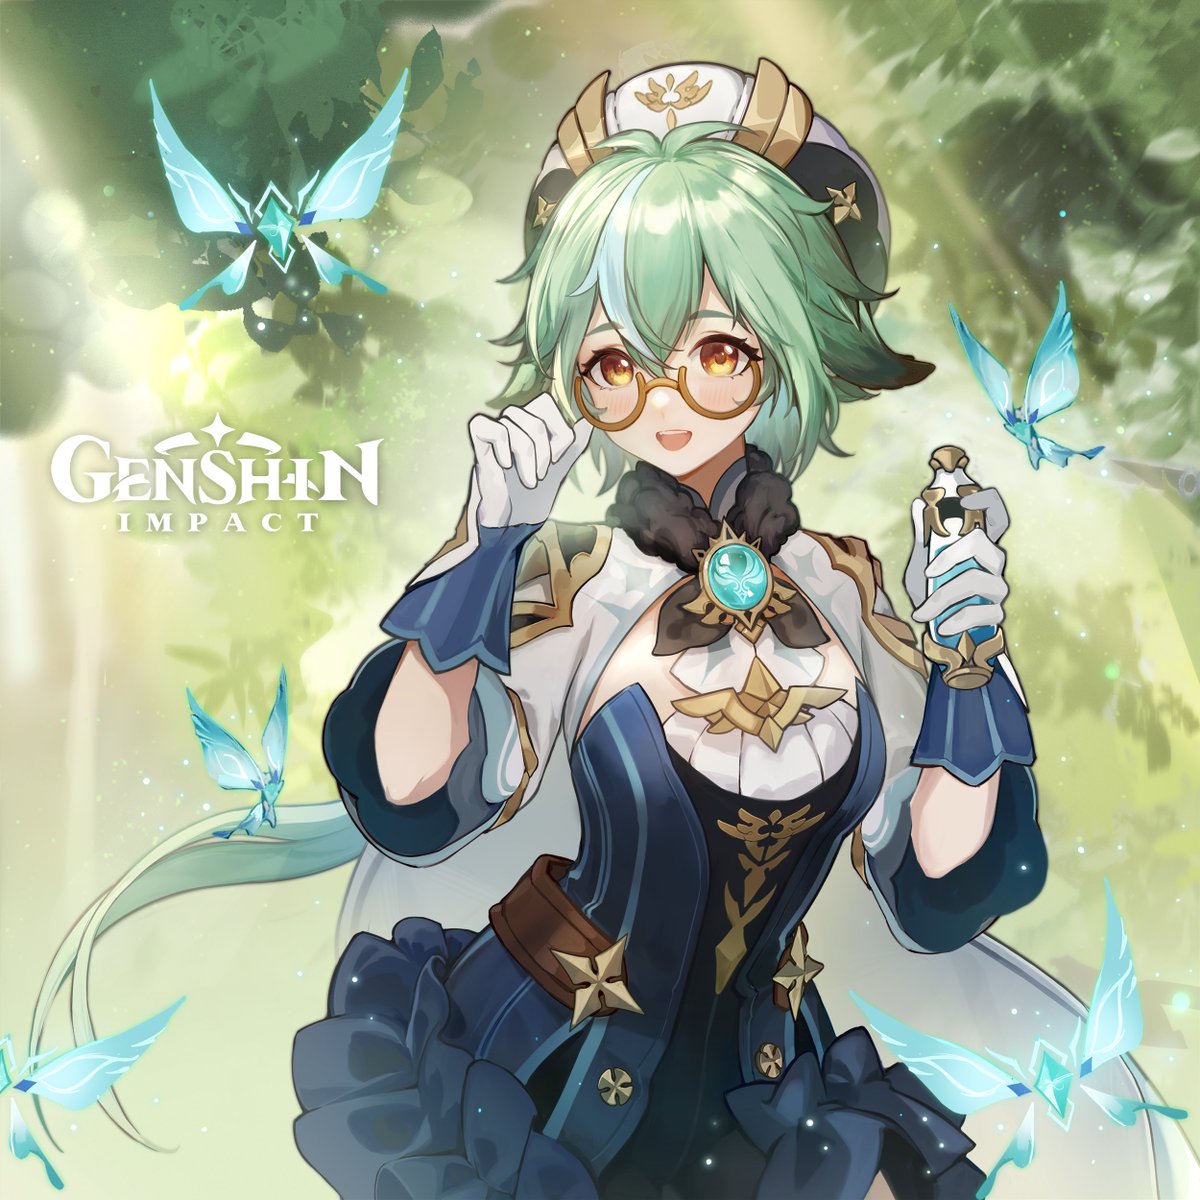 Hmm... we are running out of experiment materials. 

Eh? I—It's you! These materials, they're for me? Thank you so much!

Here, have this. This potion is the result of my latest research and will prove useful in your adventures. Please take it!
#GenshinImpact #Sucrose